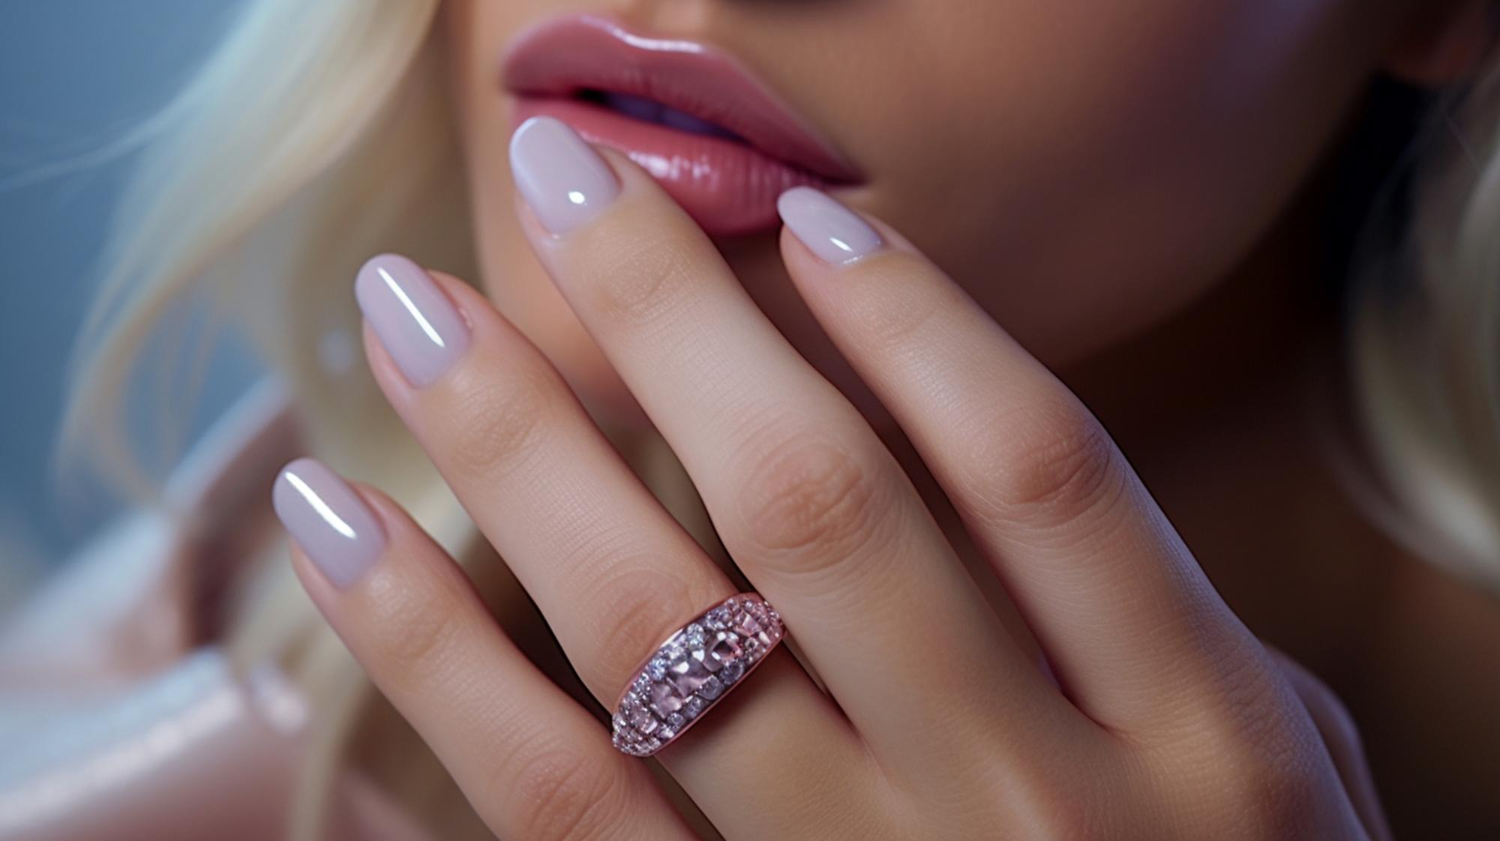 Delicately colored nails and lips